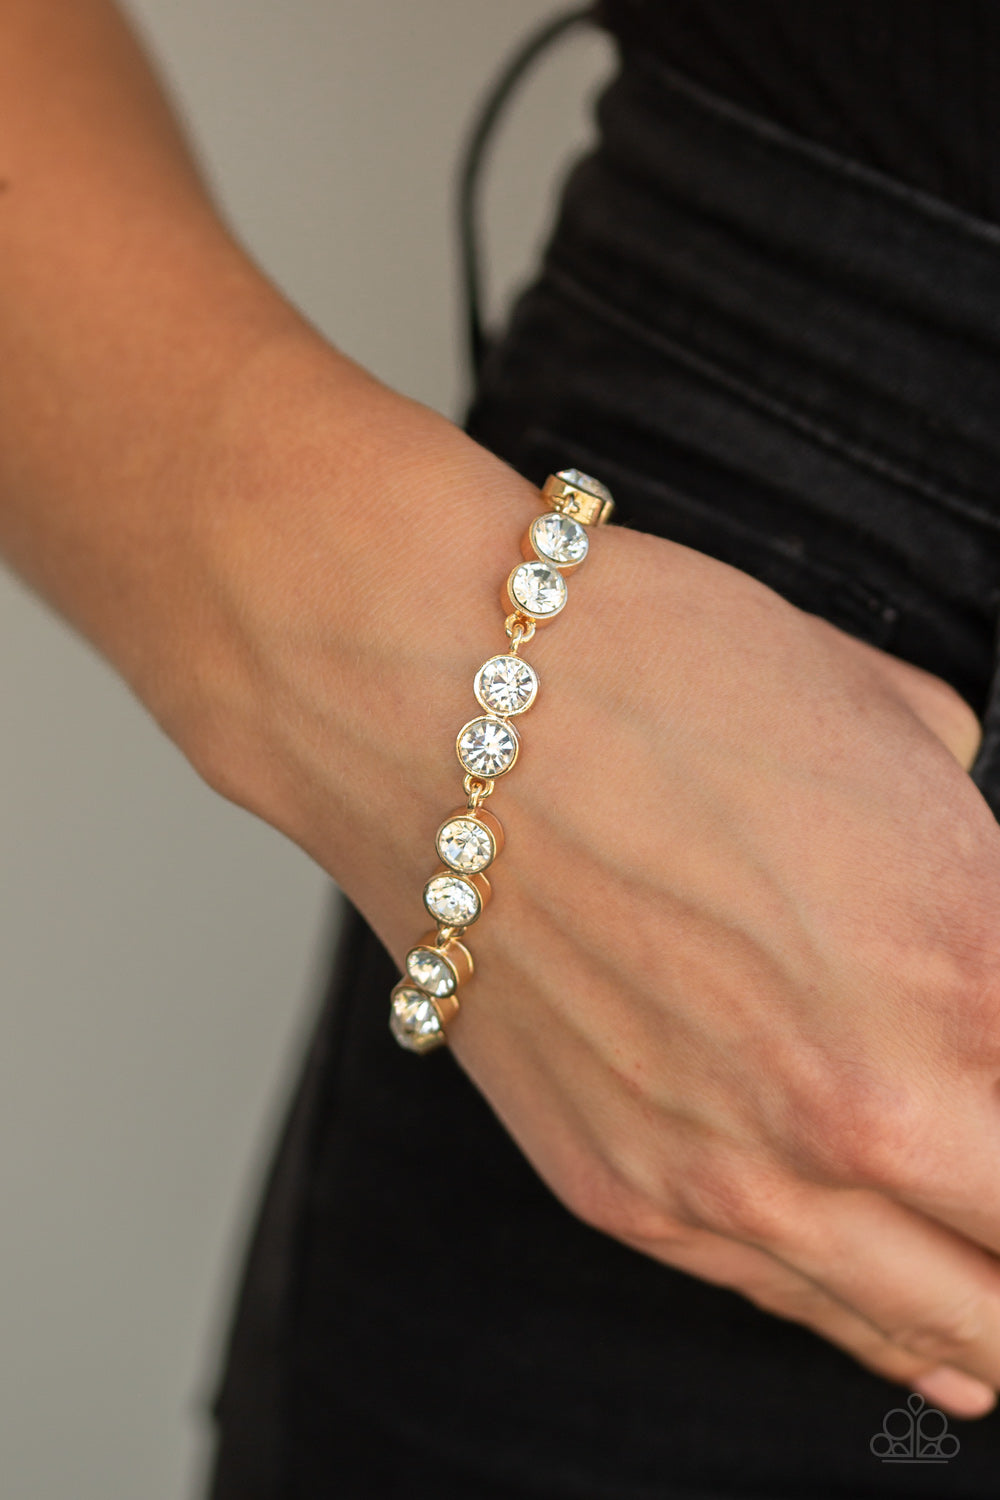 Paparazzi Accessories - By All Means - Gold Bracelet